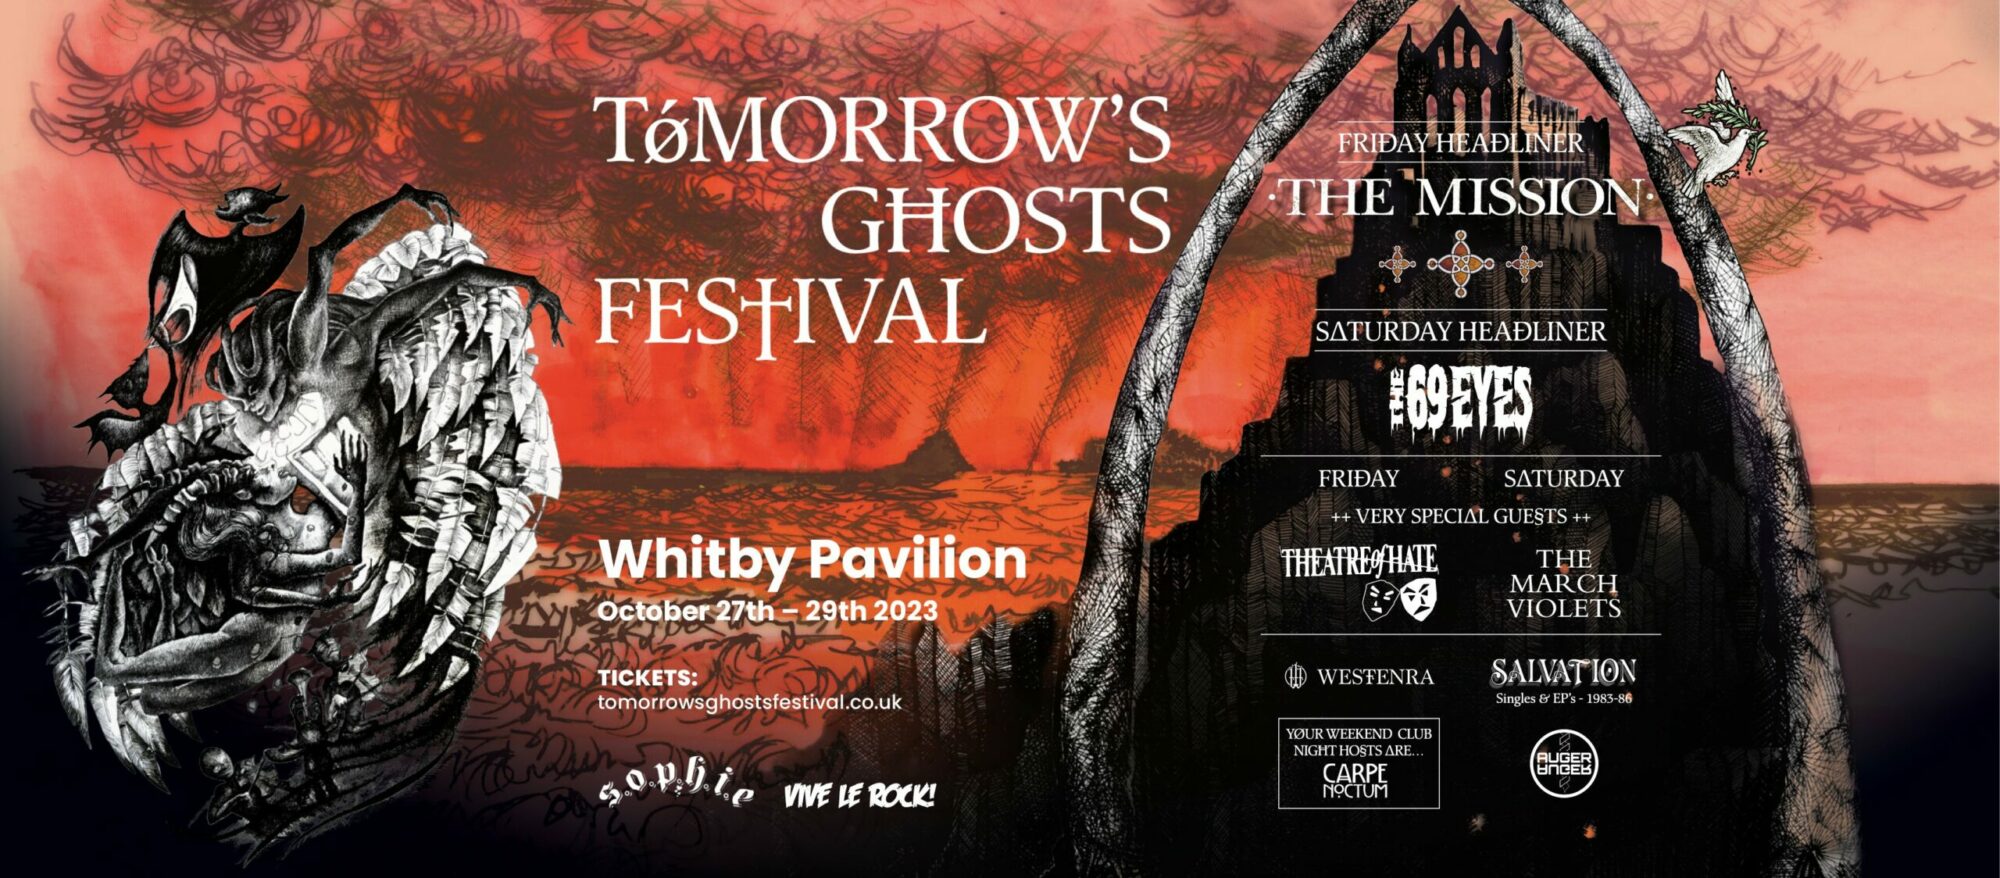 Image name Tomorrows Ghosts Festival Halloween Gathering Weekend Ticket at Whitby Pavilion Northern Lights Suite Whitby scaled the 1 image from the post Tomorrow's Ghosts Festival // Halloween Gathering Weekend Ticket at Whitby Pavilion Northern Lights Suite, Whitby in Yorkshire.com.